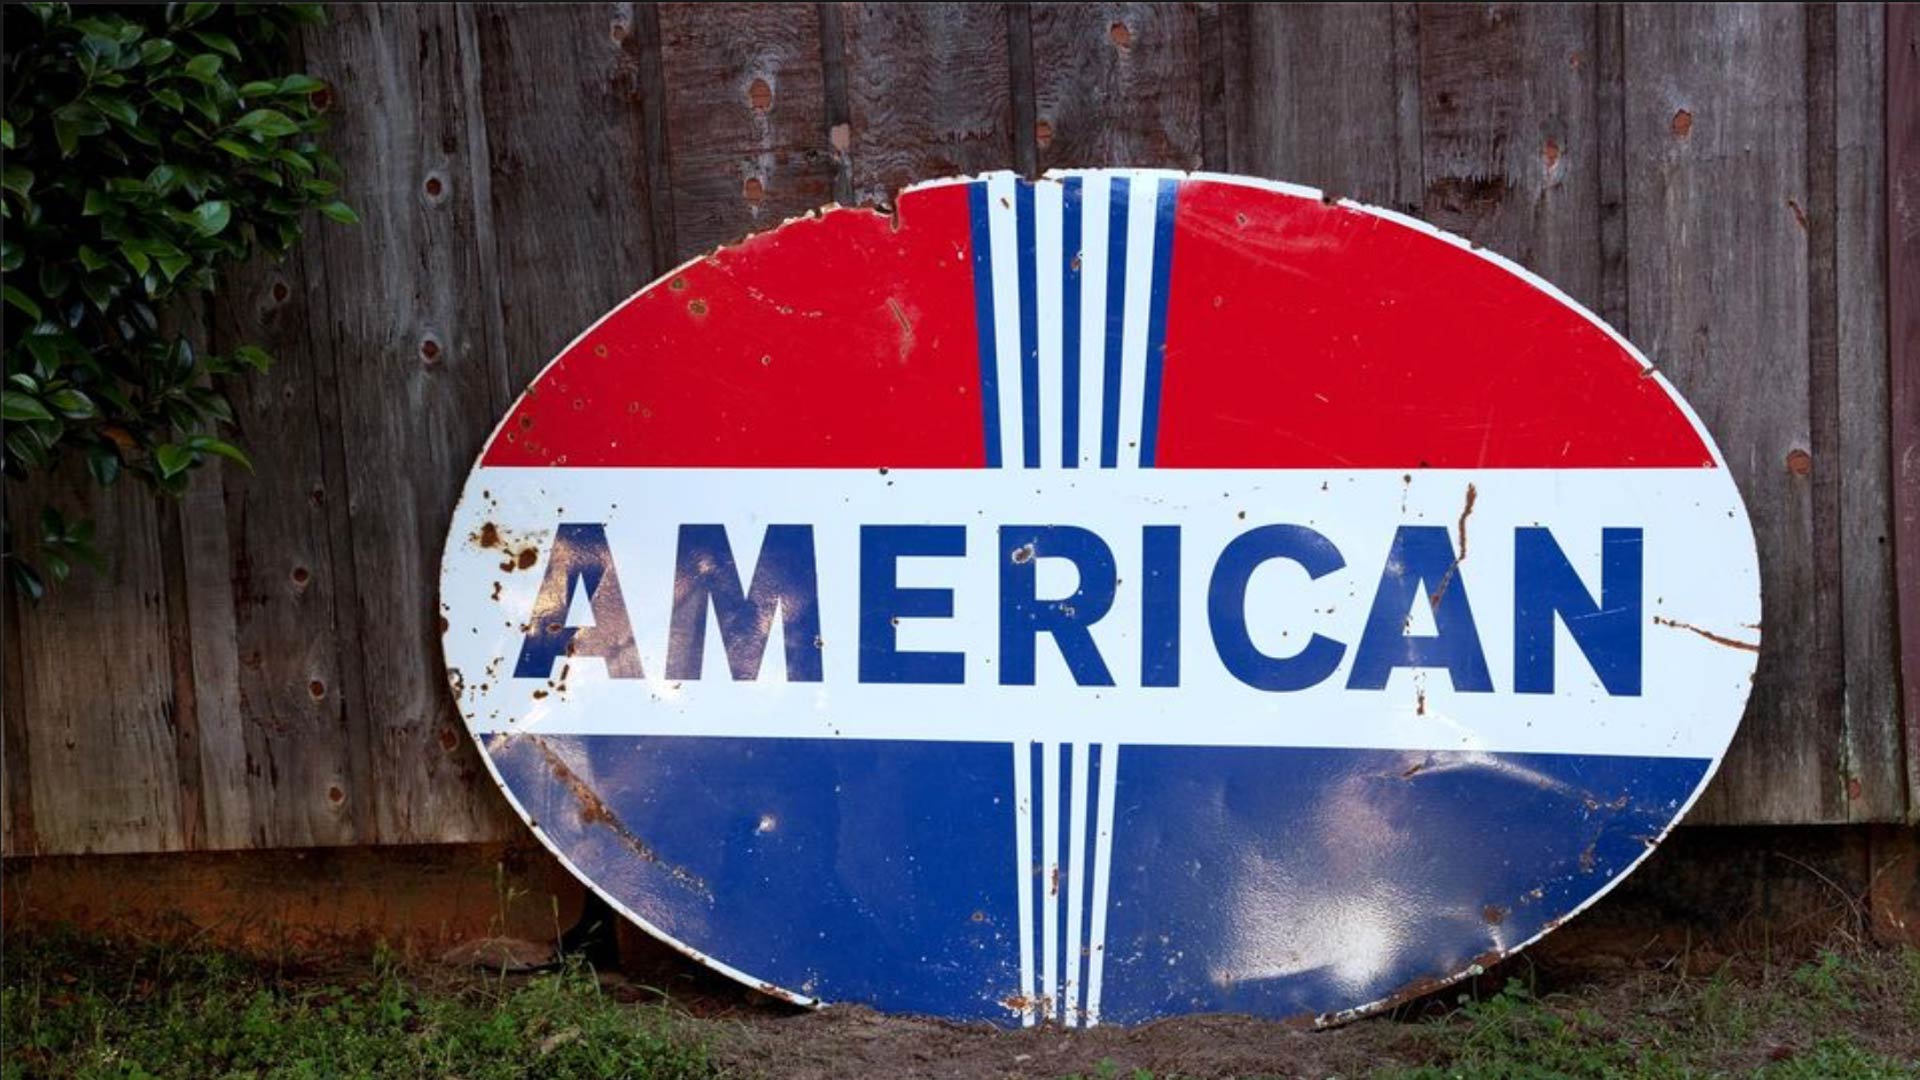 a rusted and dented oval sign with AMERICAN written on it leaning against a fence